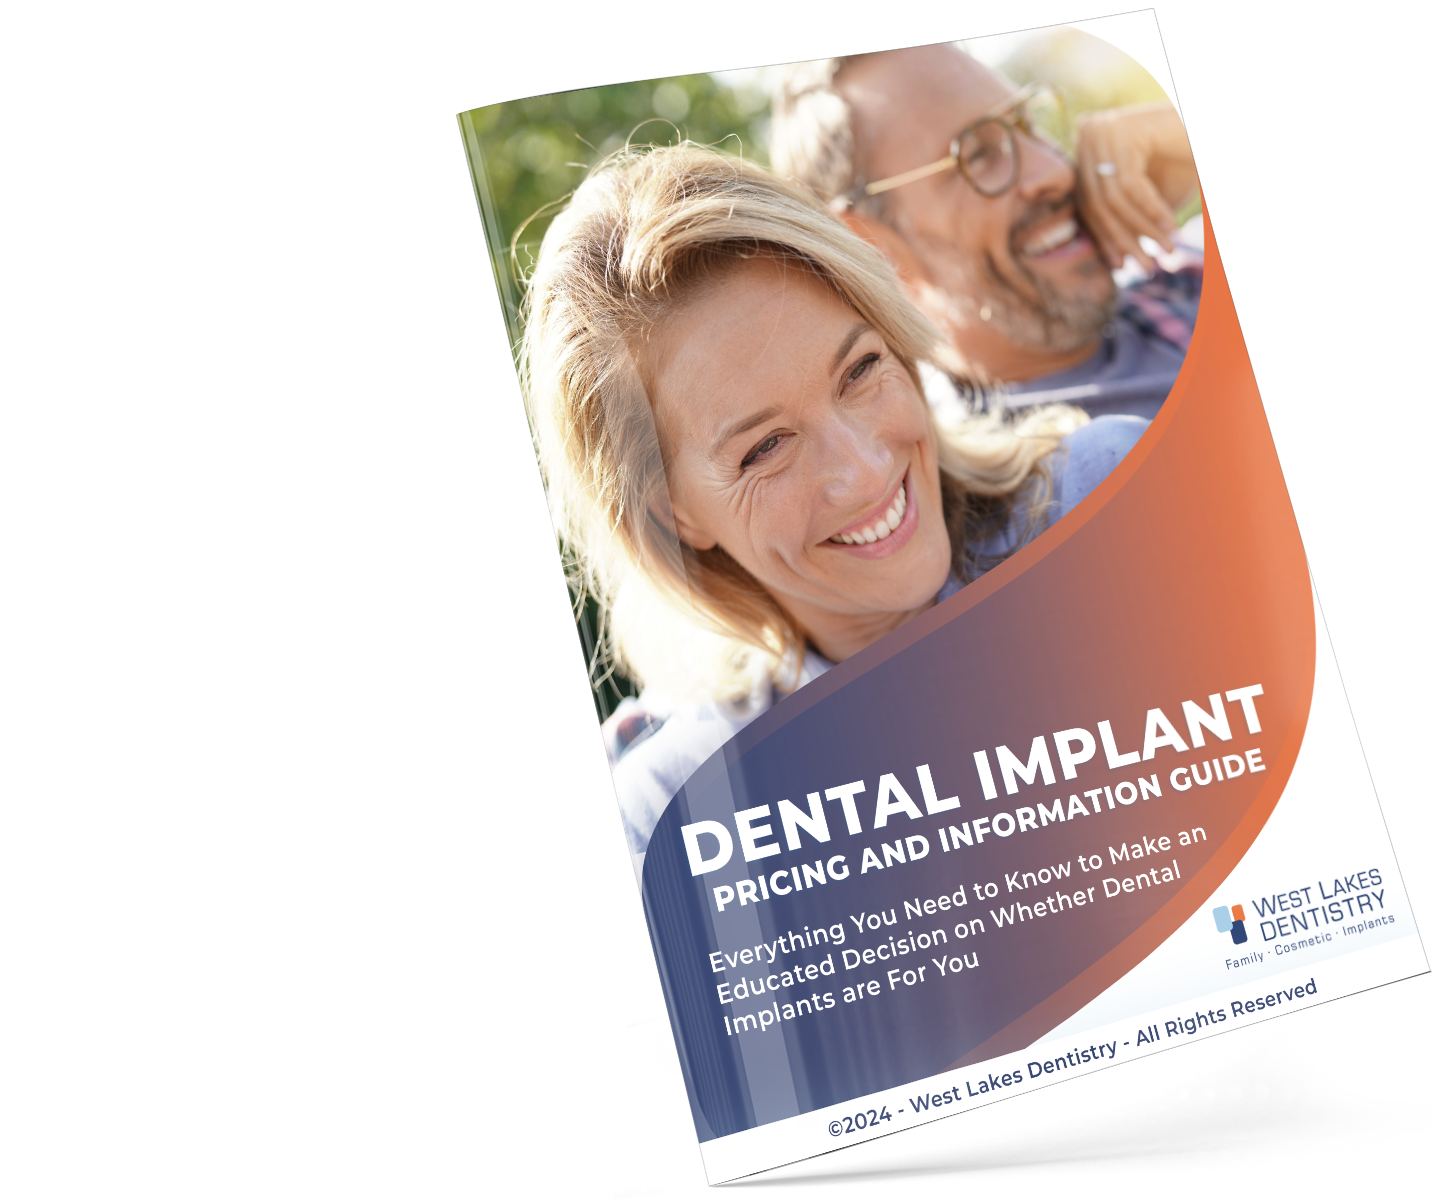 west lakes dentistry dental implant pricing guide book mockup